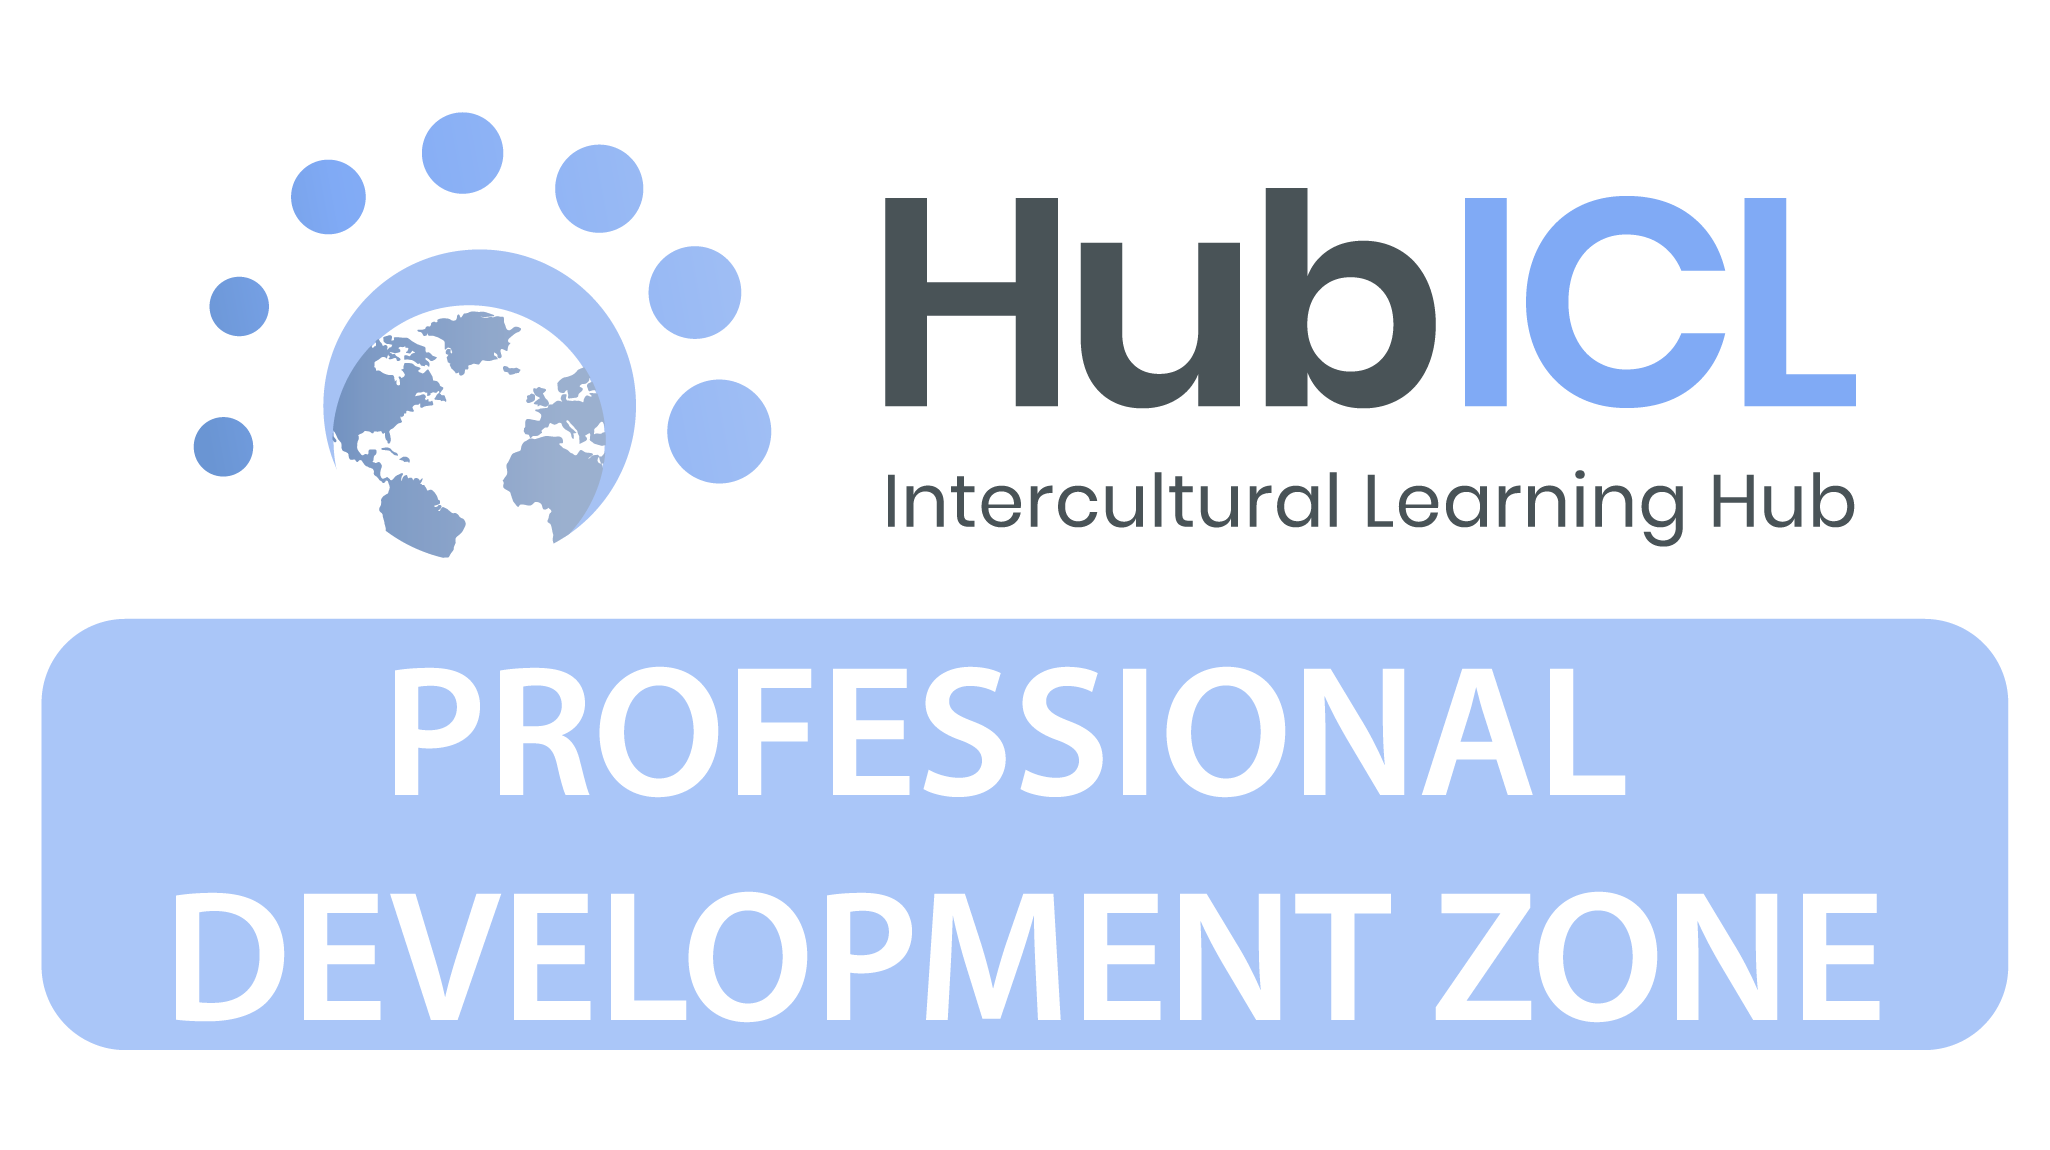 Important considerations for intercultural learning tool creation